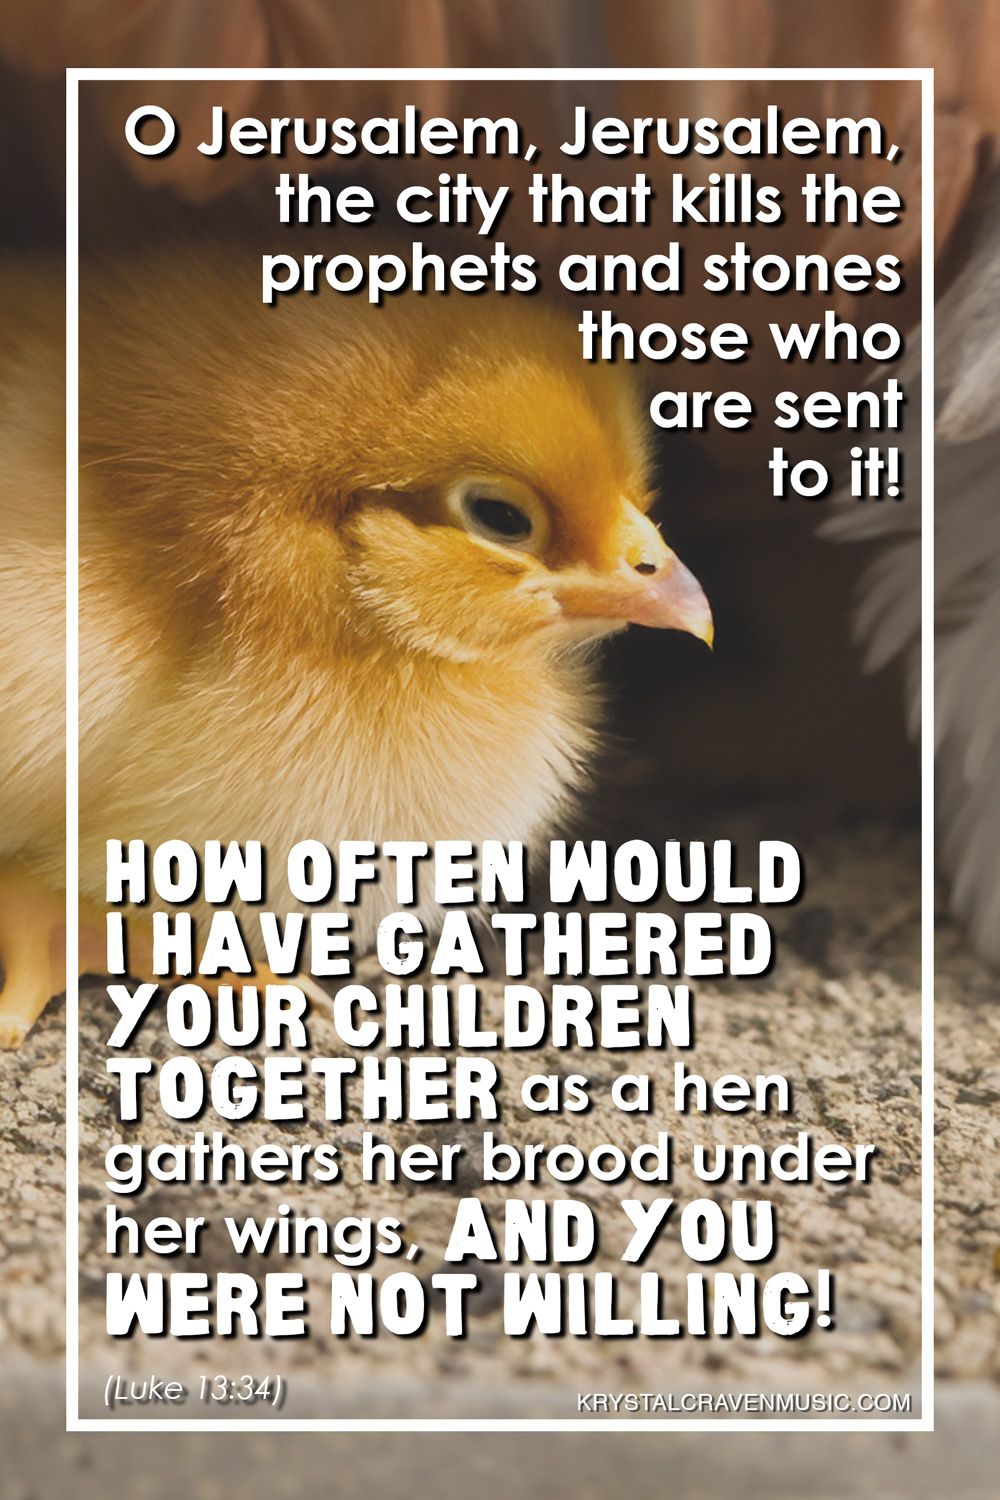 The text from Luke 13:34 "O Jerusalem, Jerusalem, the city that kills the prophets and stones those who are sent to it! How often would I have gathered your children together as a hen gathers her brood under her wings, and you were not willing!" over a picture of a chick nestled under the feathers of an adult chicken.